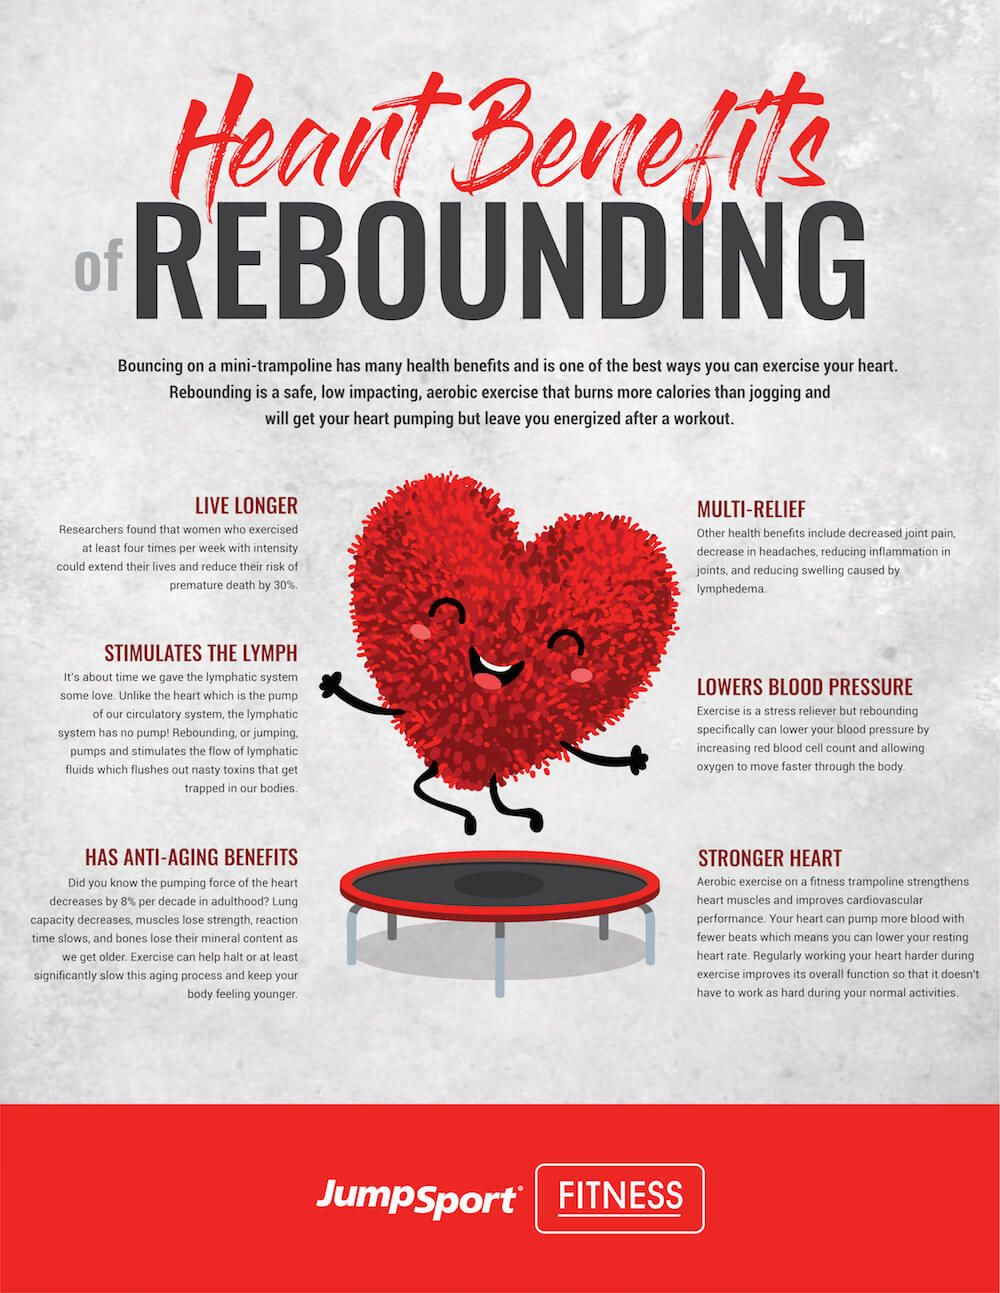 Health benefits of rebounding for your heart infographic